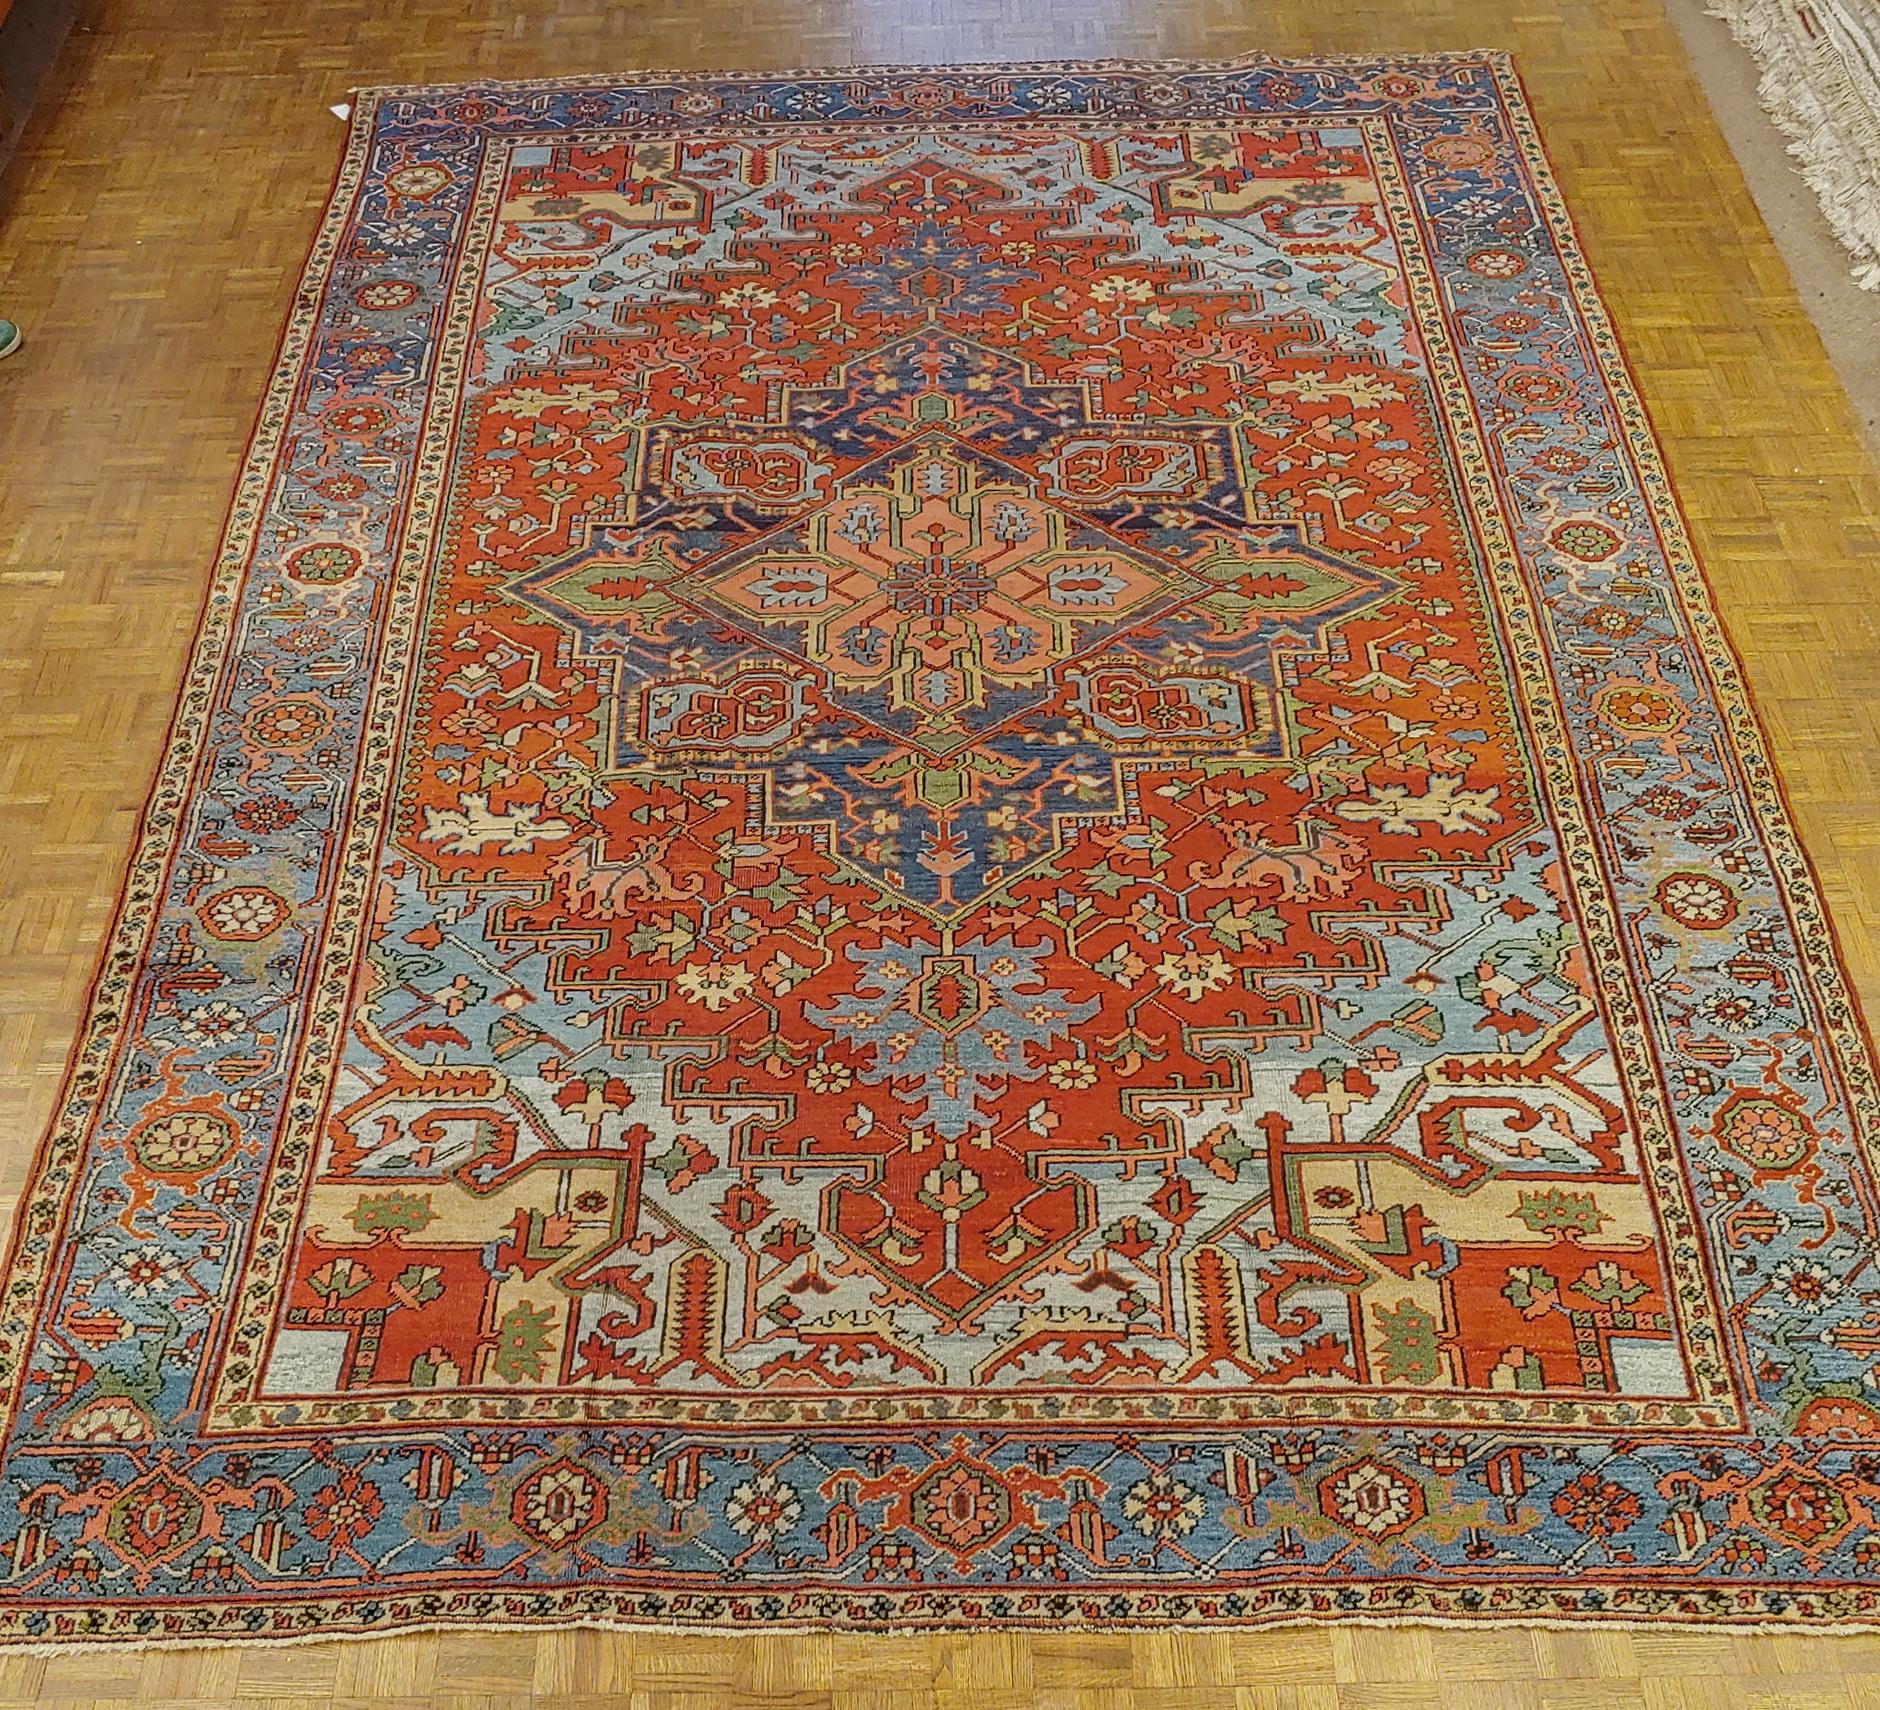 Antique Persian Heriz Rug, Rust Colored with Light Blue Wool, Room Size 2